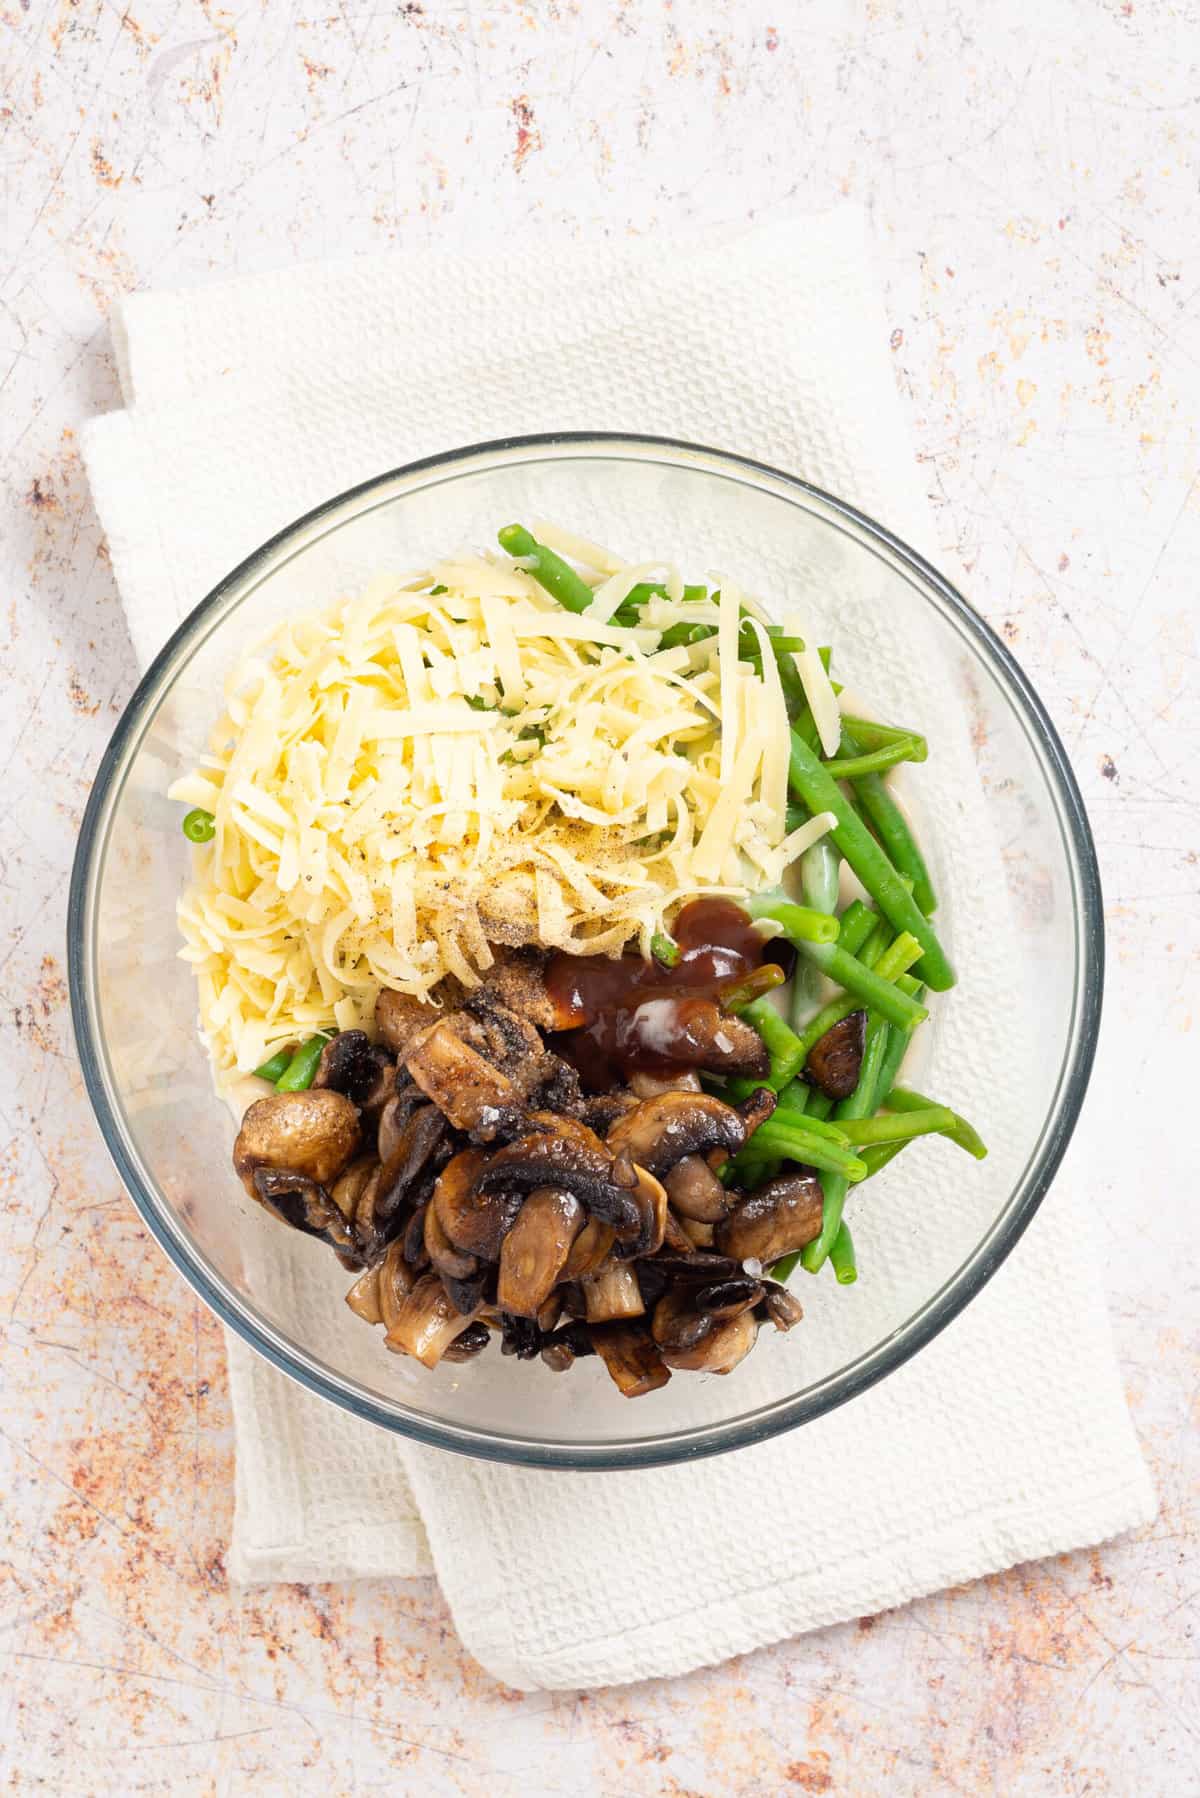 An overhead image of cooked mushrooms, blanched green beans, and cheddar cheese in a clear bowl.